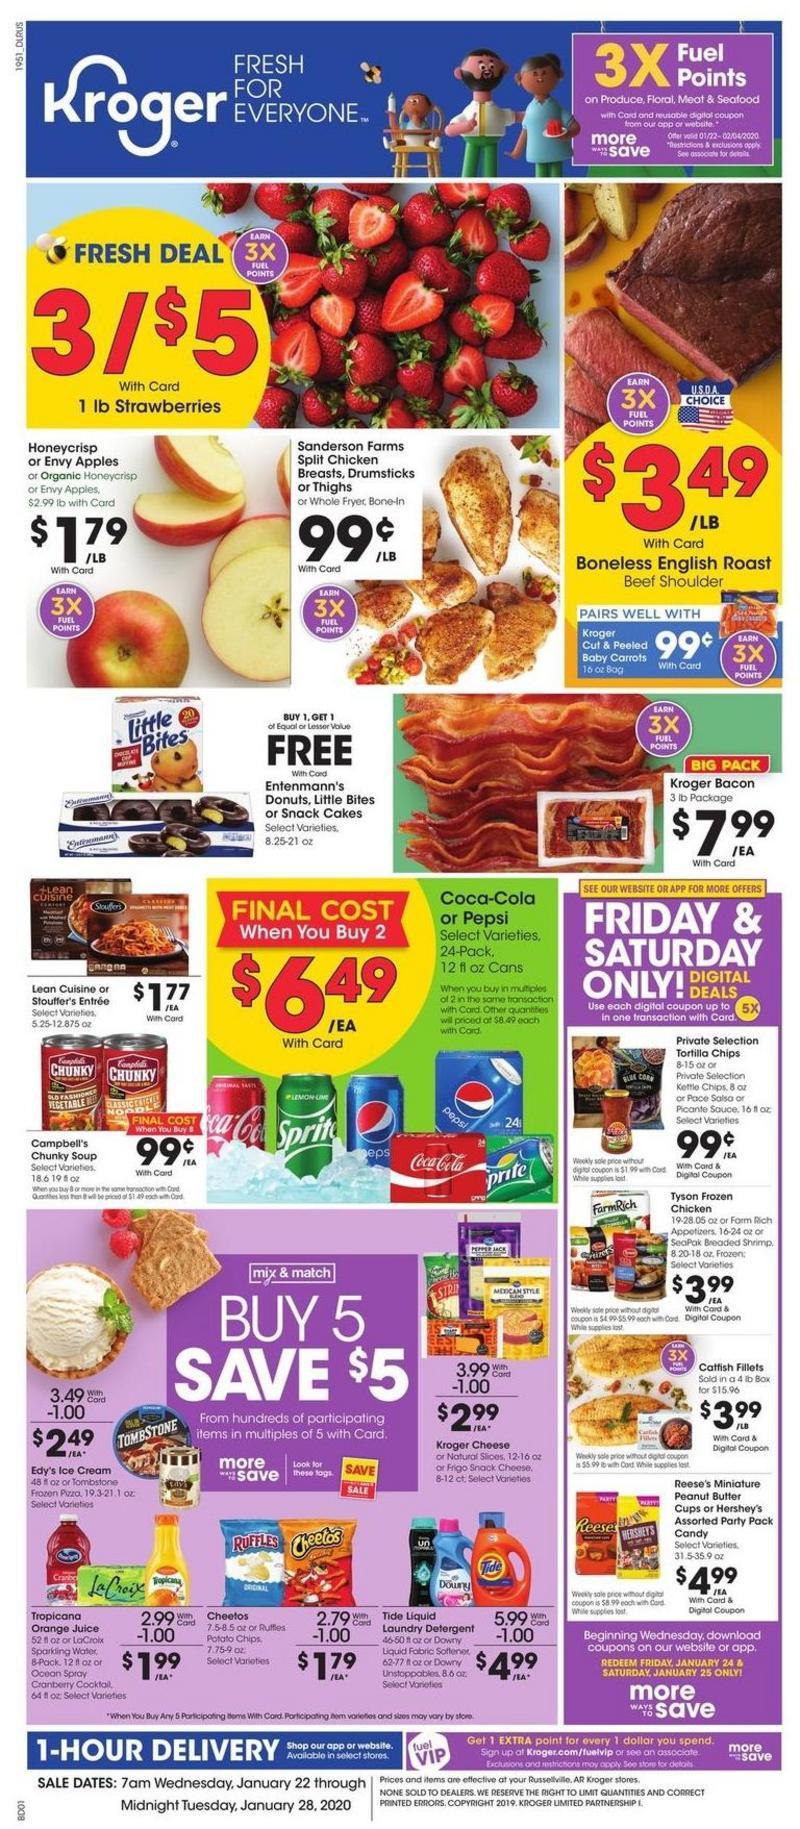 Kroger Weekly Ad from January 22